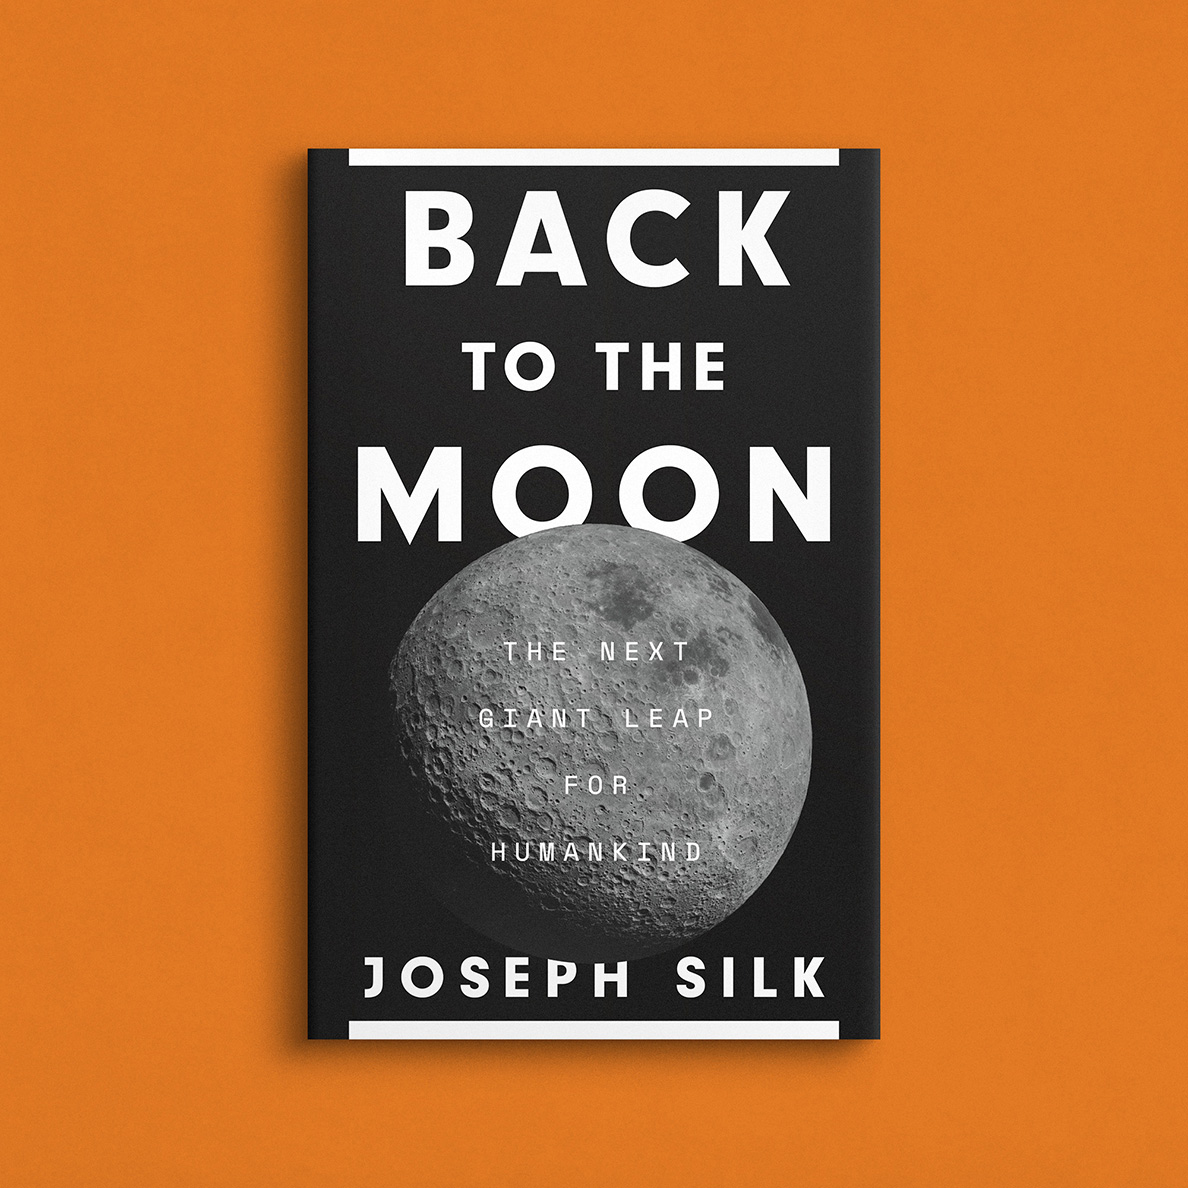 Back to the Moon book cover